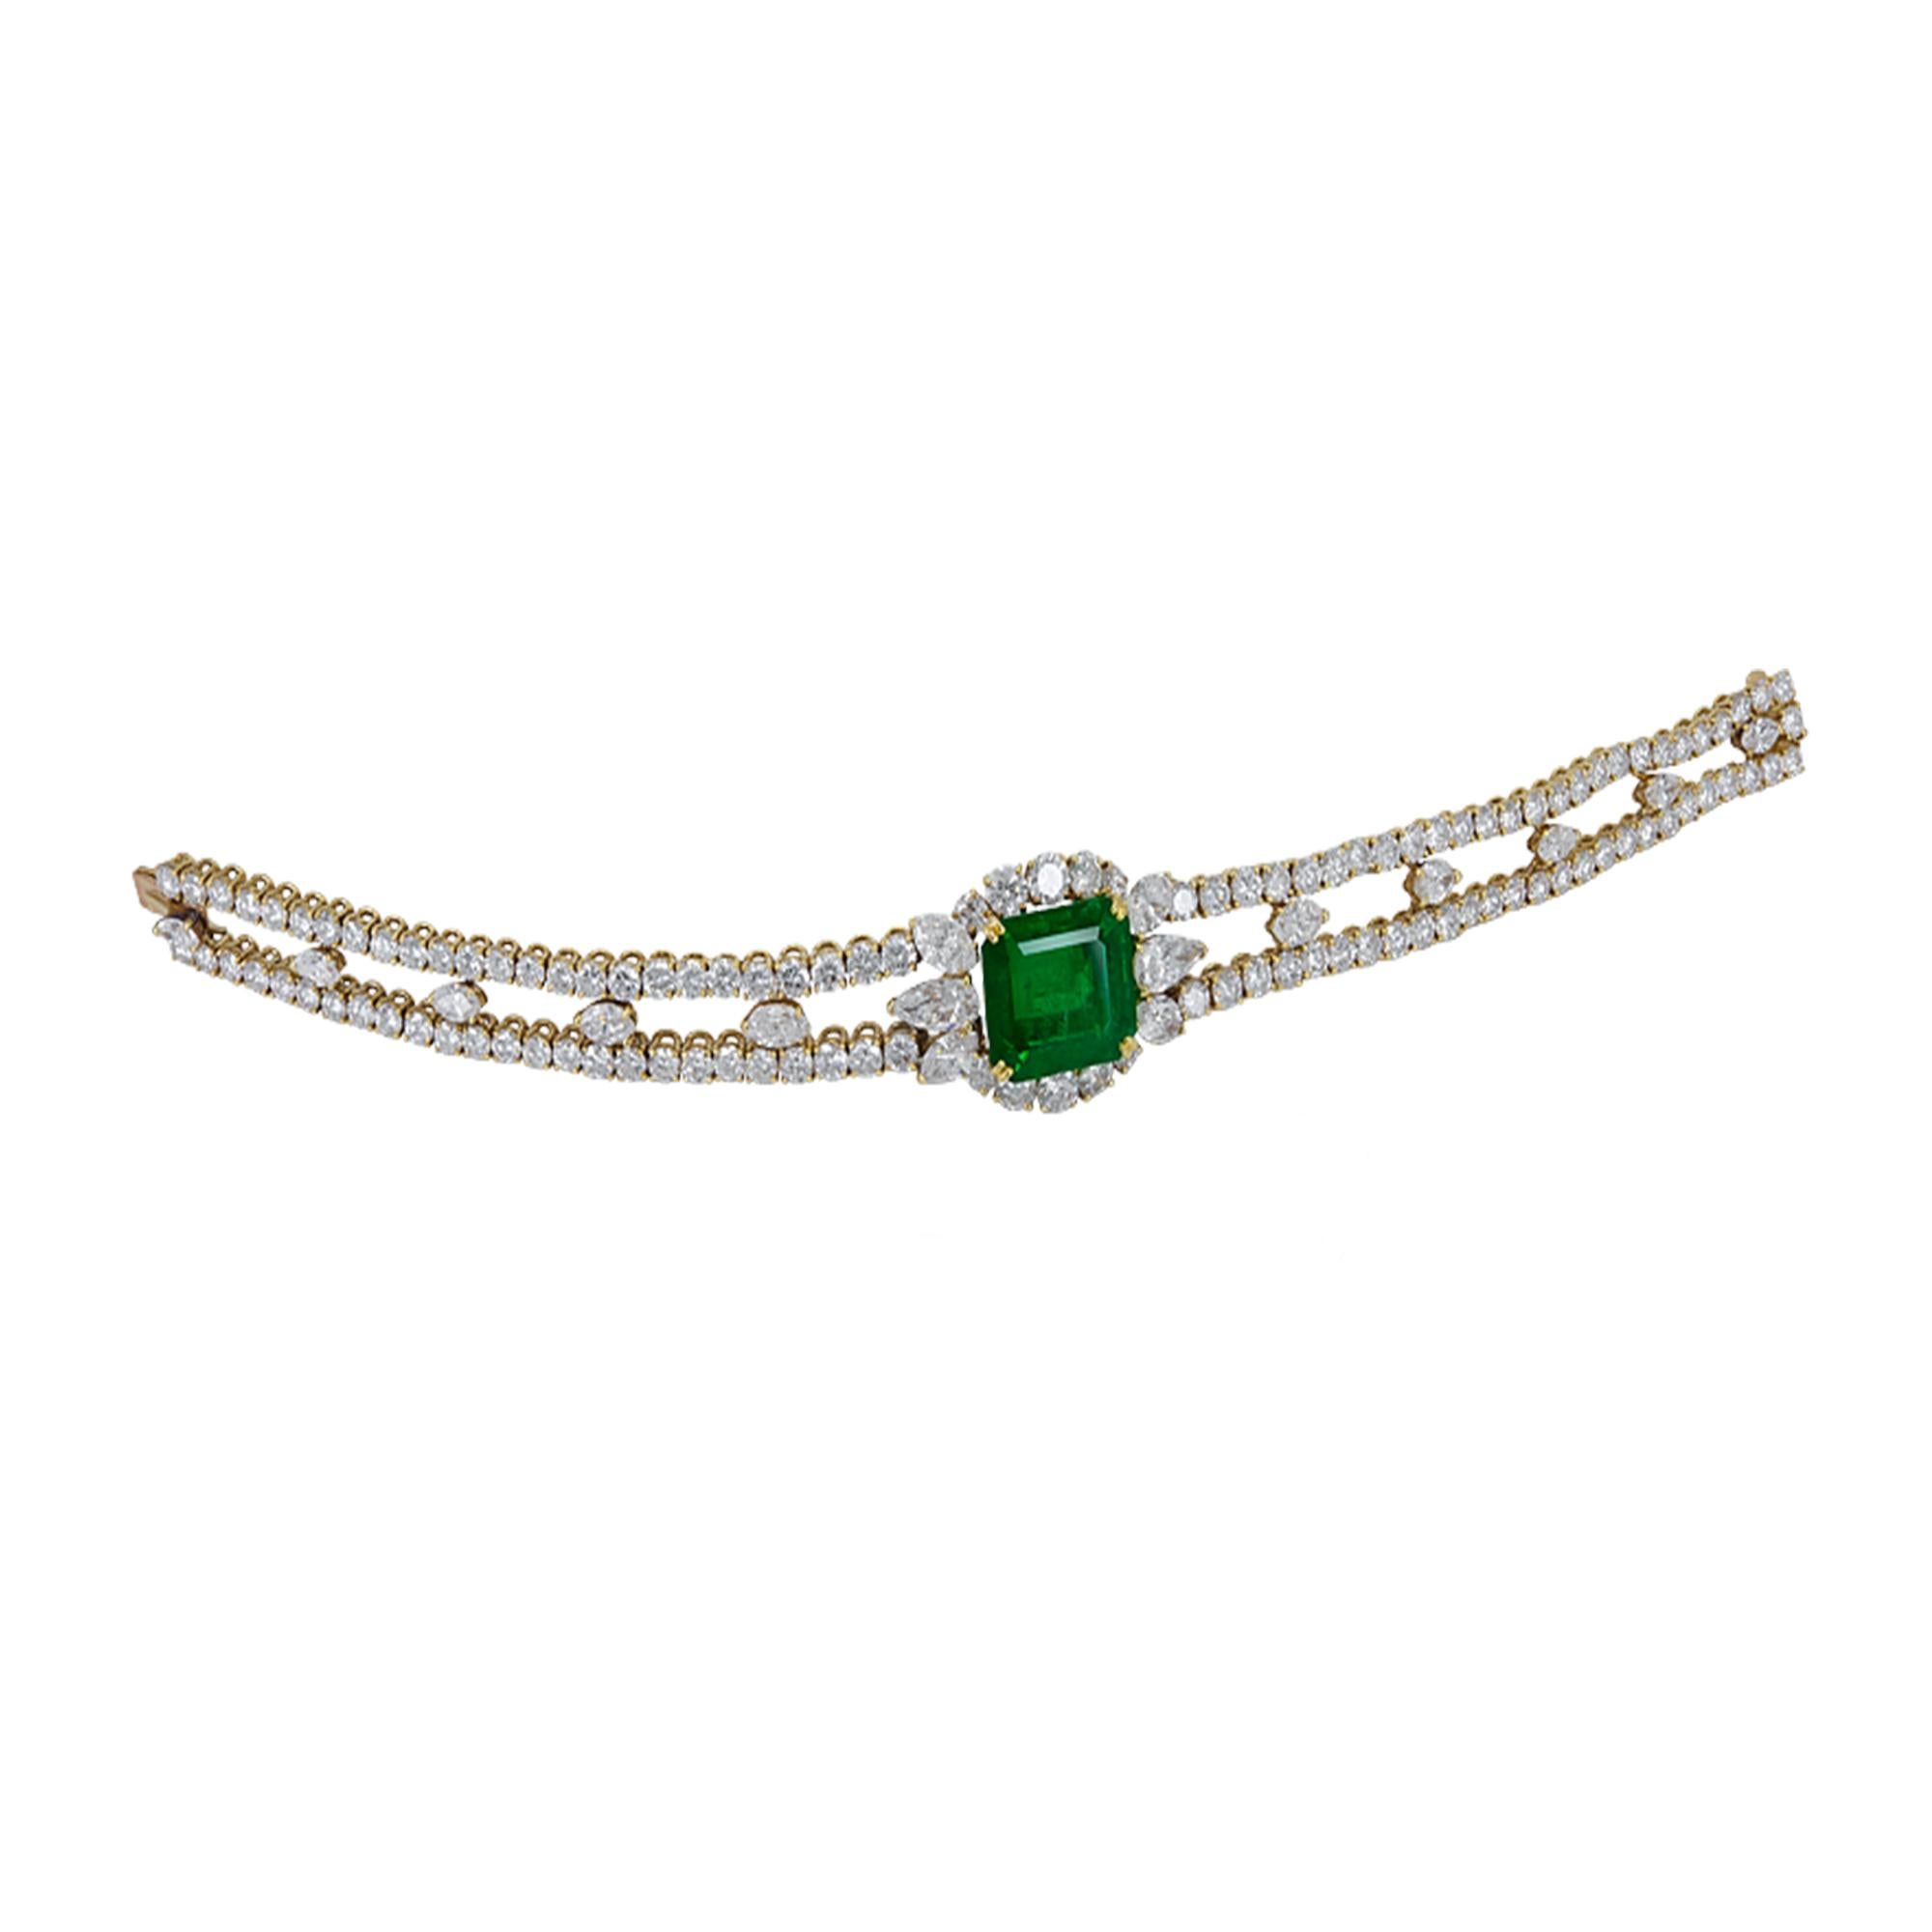 This amazing bracelet is embellished with a 9.50 carat Zambian emerald and 17.45 carats of white diamonds.
Accompanied by a certificate from SSEF.
Mounted in 18k yellow gold weighing 32.94 grams.
Created by the French jeweler Andre Vassort, one of